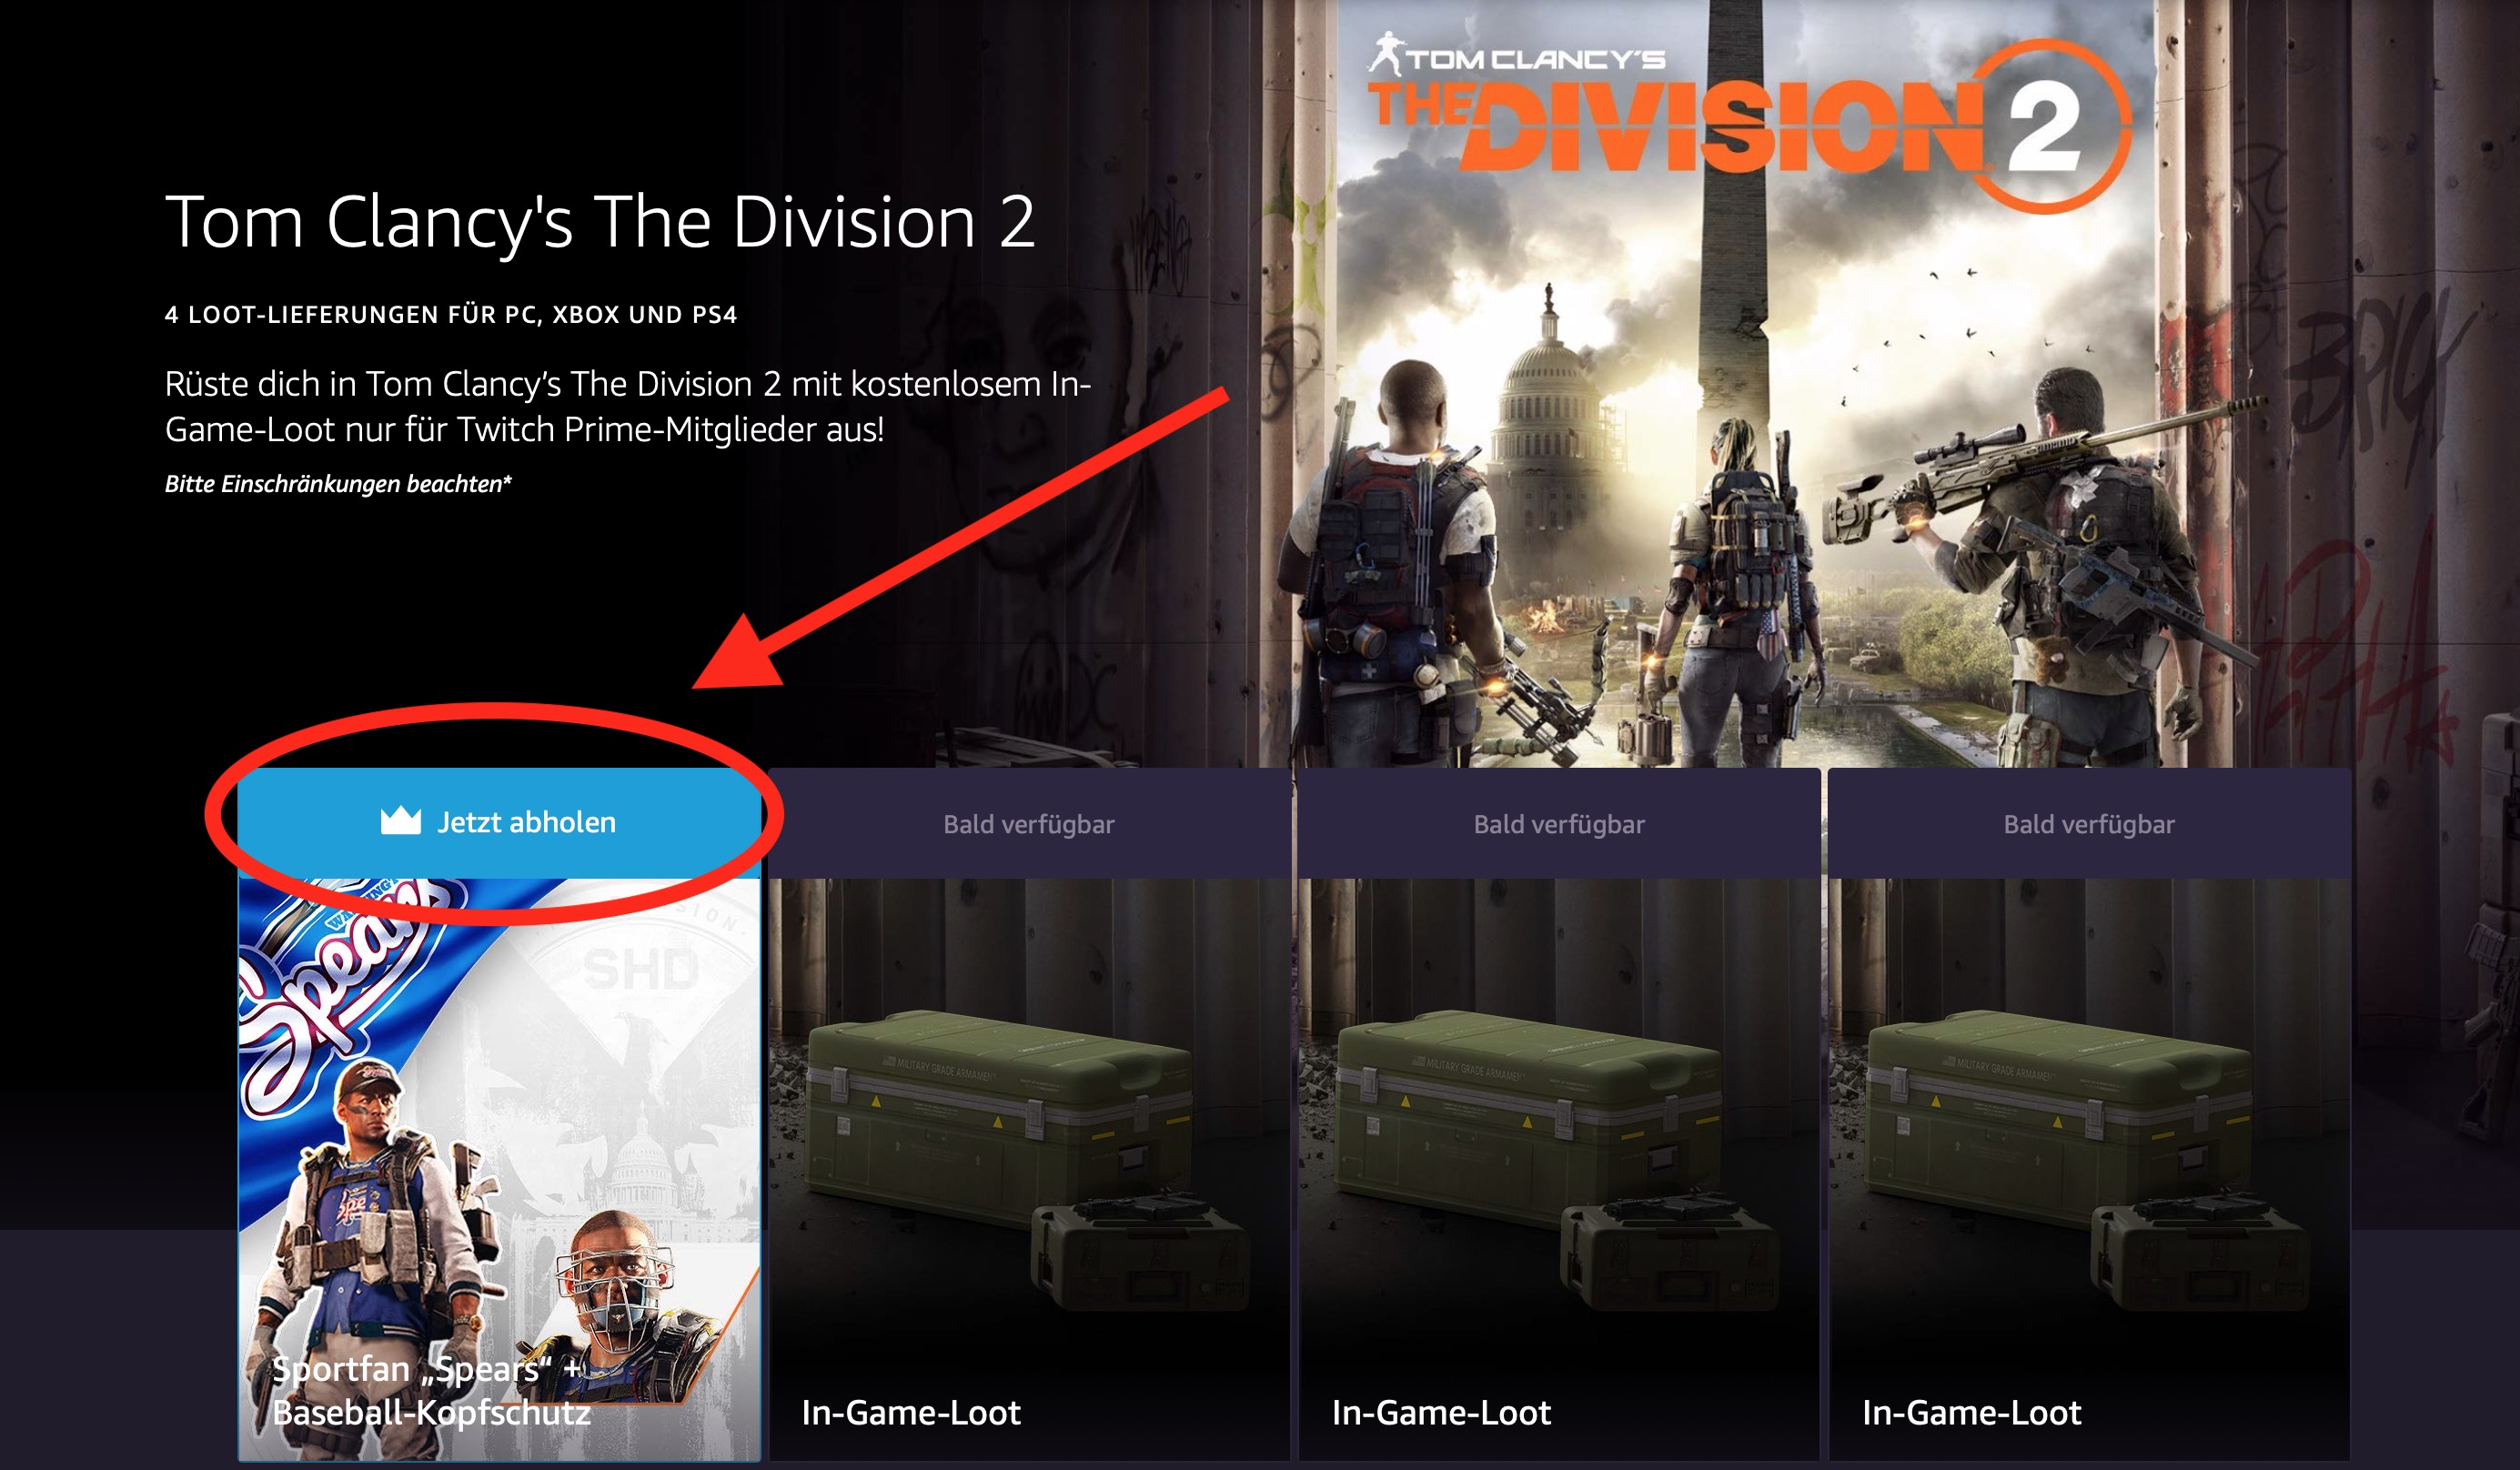 The Division 2 gets sweet series of Twitch Prime loot drops